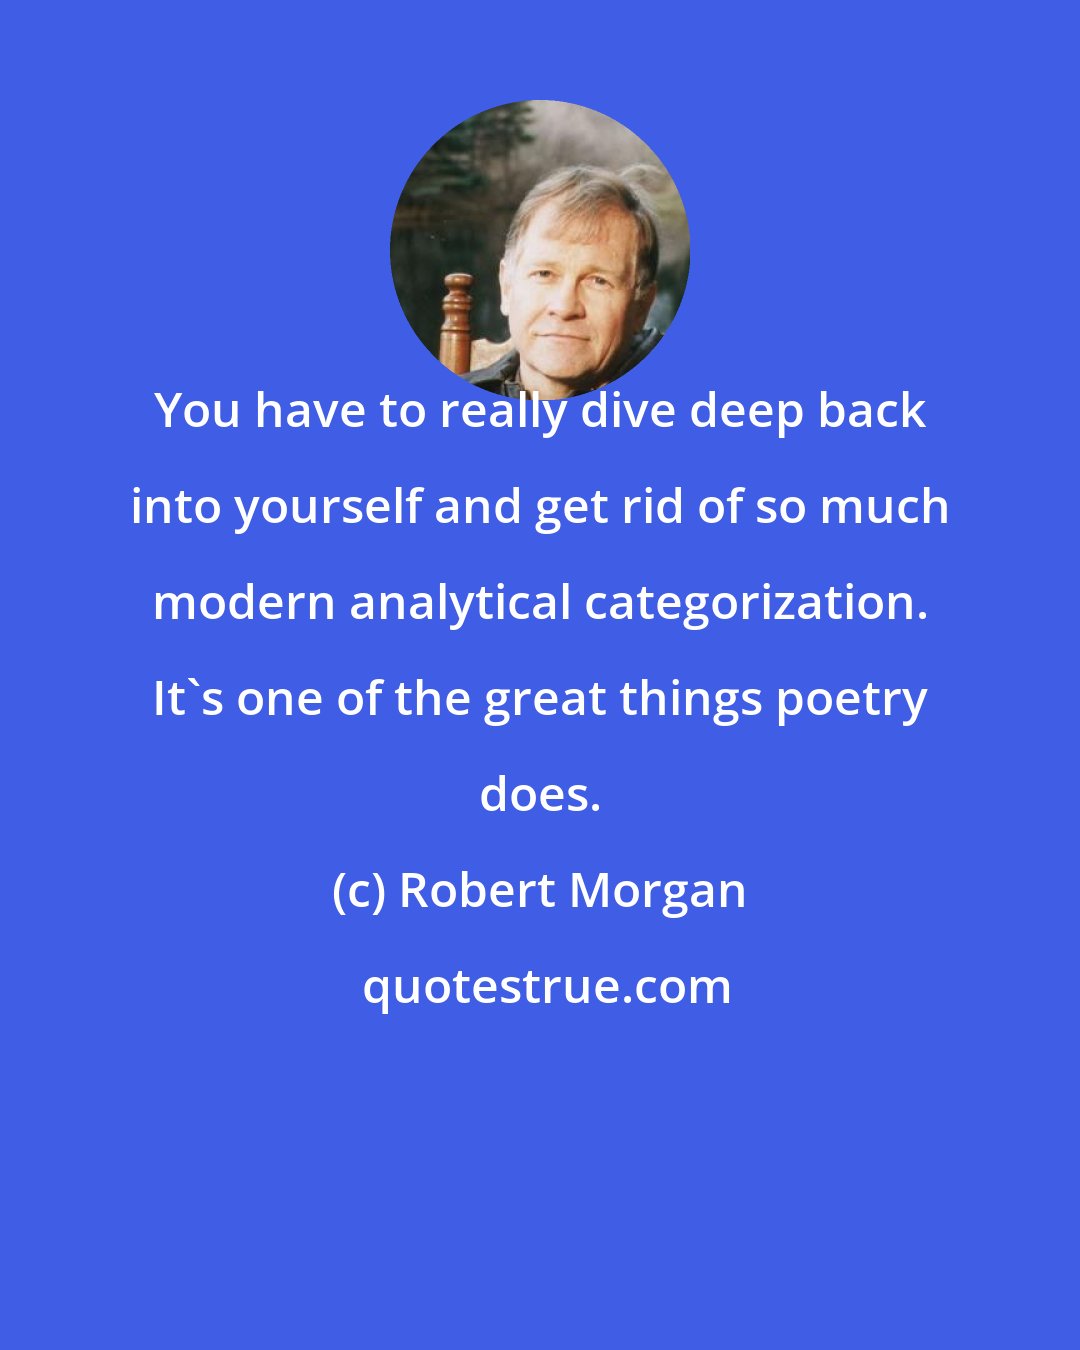 Robert Morgan: You have to really dive deep back into yourself and get rid of so much modern analytical categorization. It's one of the great things poetry does.